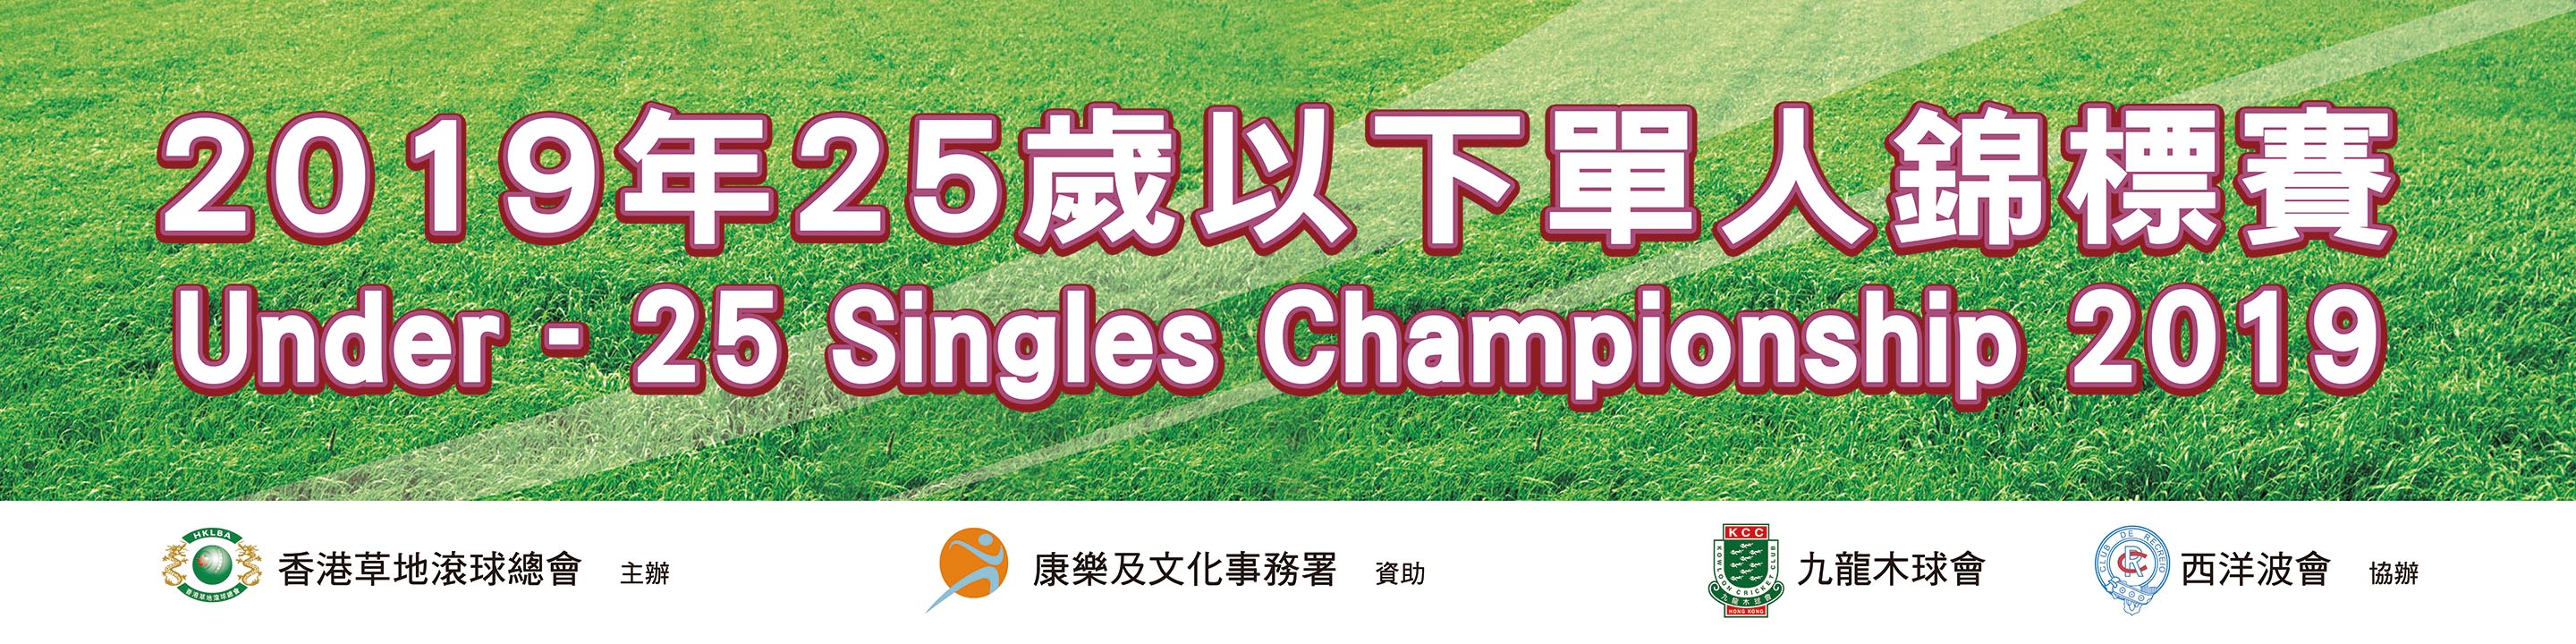 Under-25 Singles Championship 2019 (Updated on 3/1/2020)